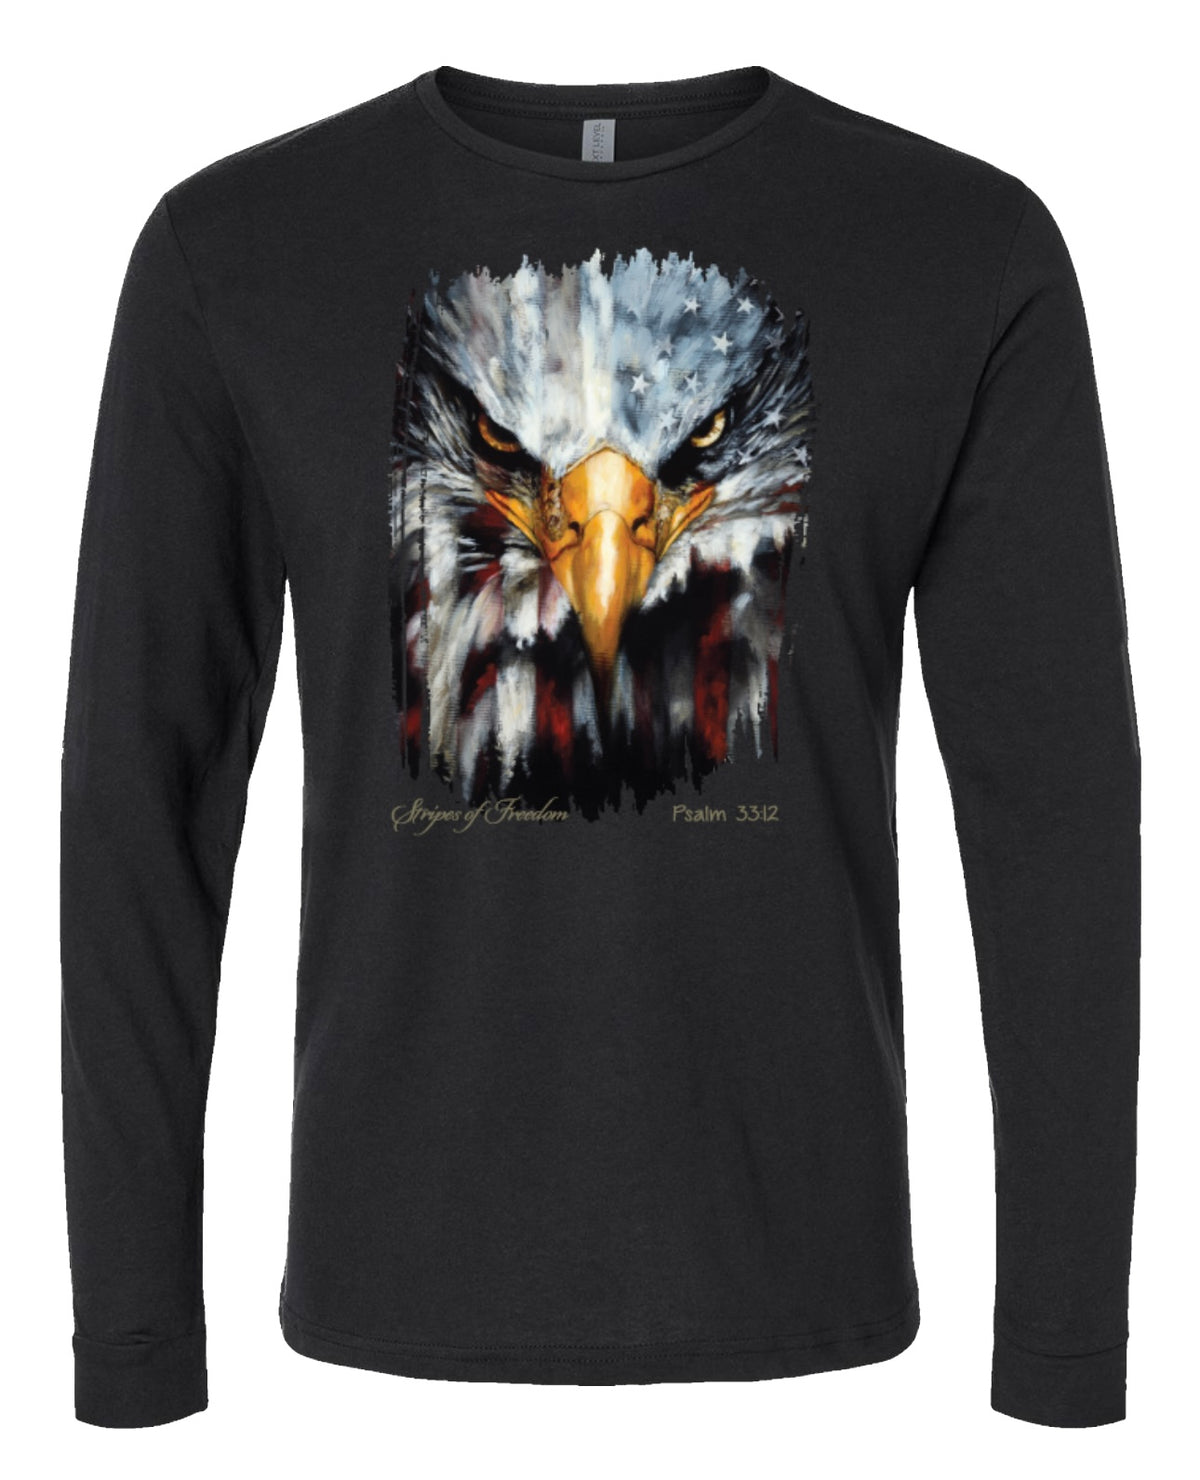 Stripes of Freedom, Long Sleeve T-Shirt - Unisex - COLORS DISCONTINUED